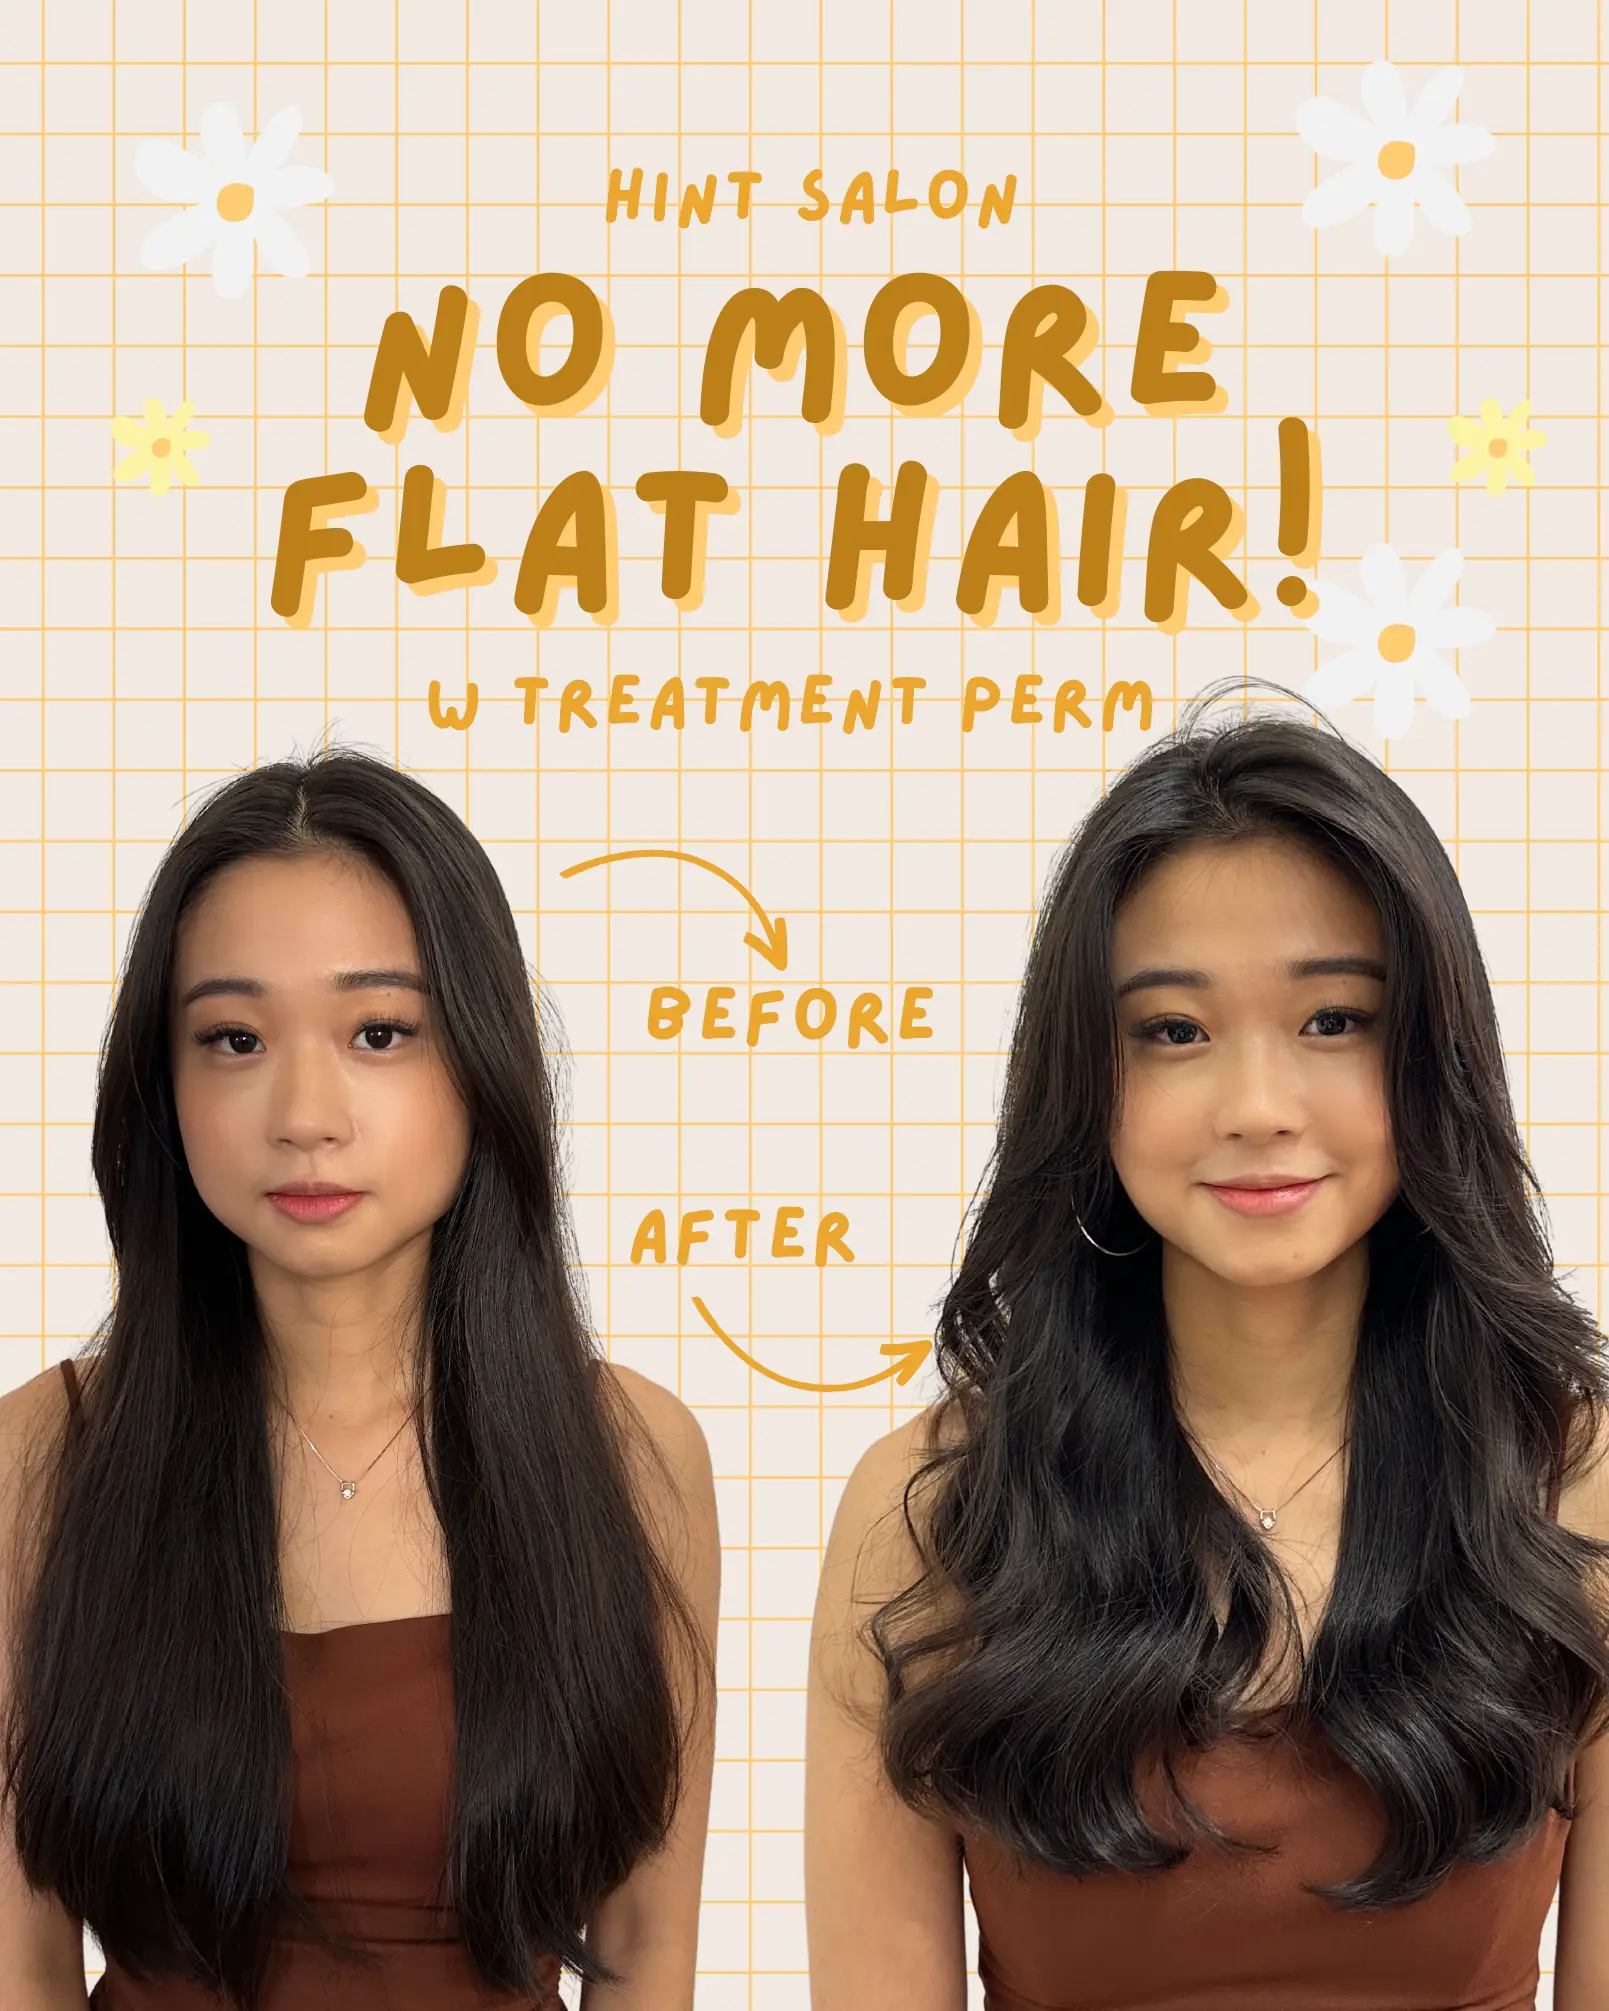 Korean style perm in Singapore 💓, Gallery posted by Hintsalonsg